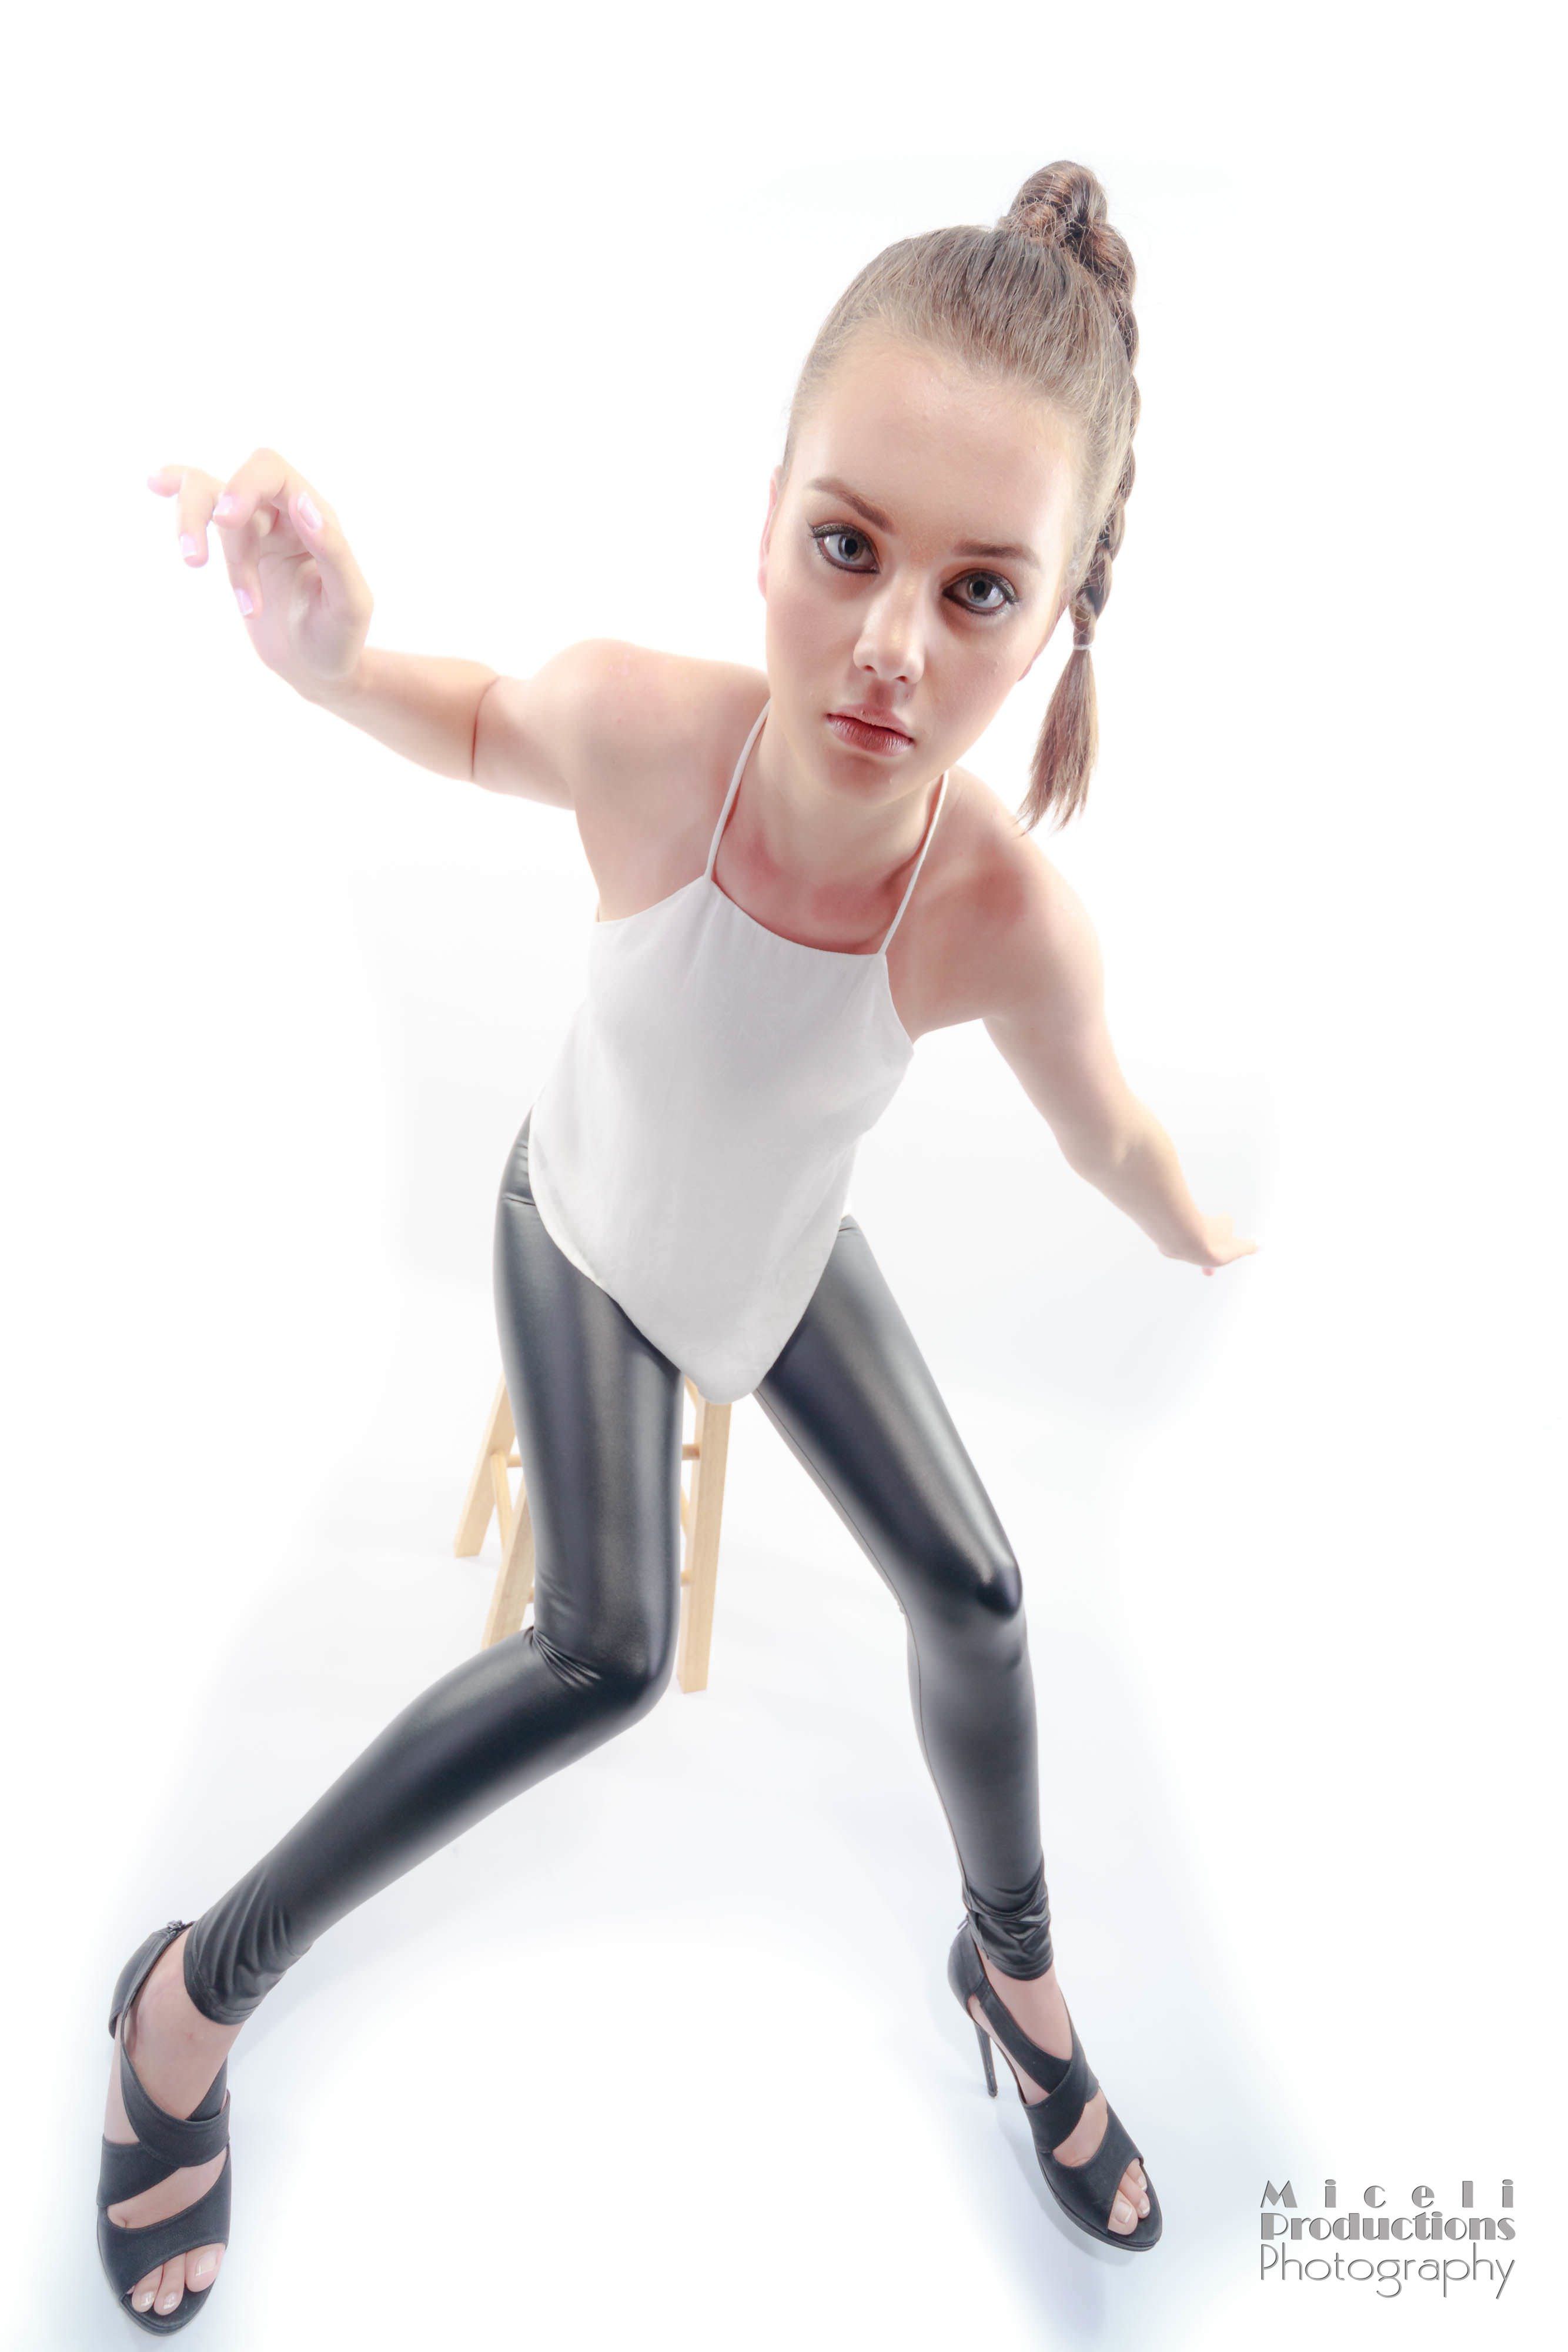 Girl model with a white tank top and black pleather pants walking strangely towards camera, looking like a doll with an effect that makes her head seem larger than her body.